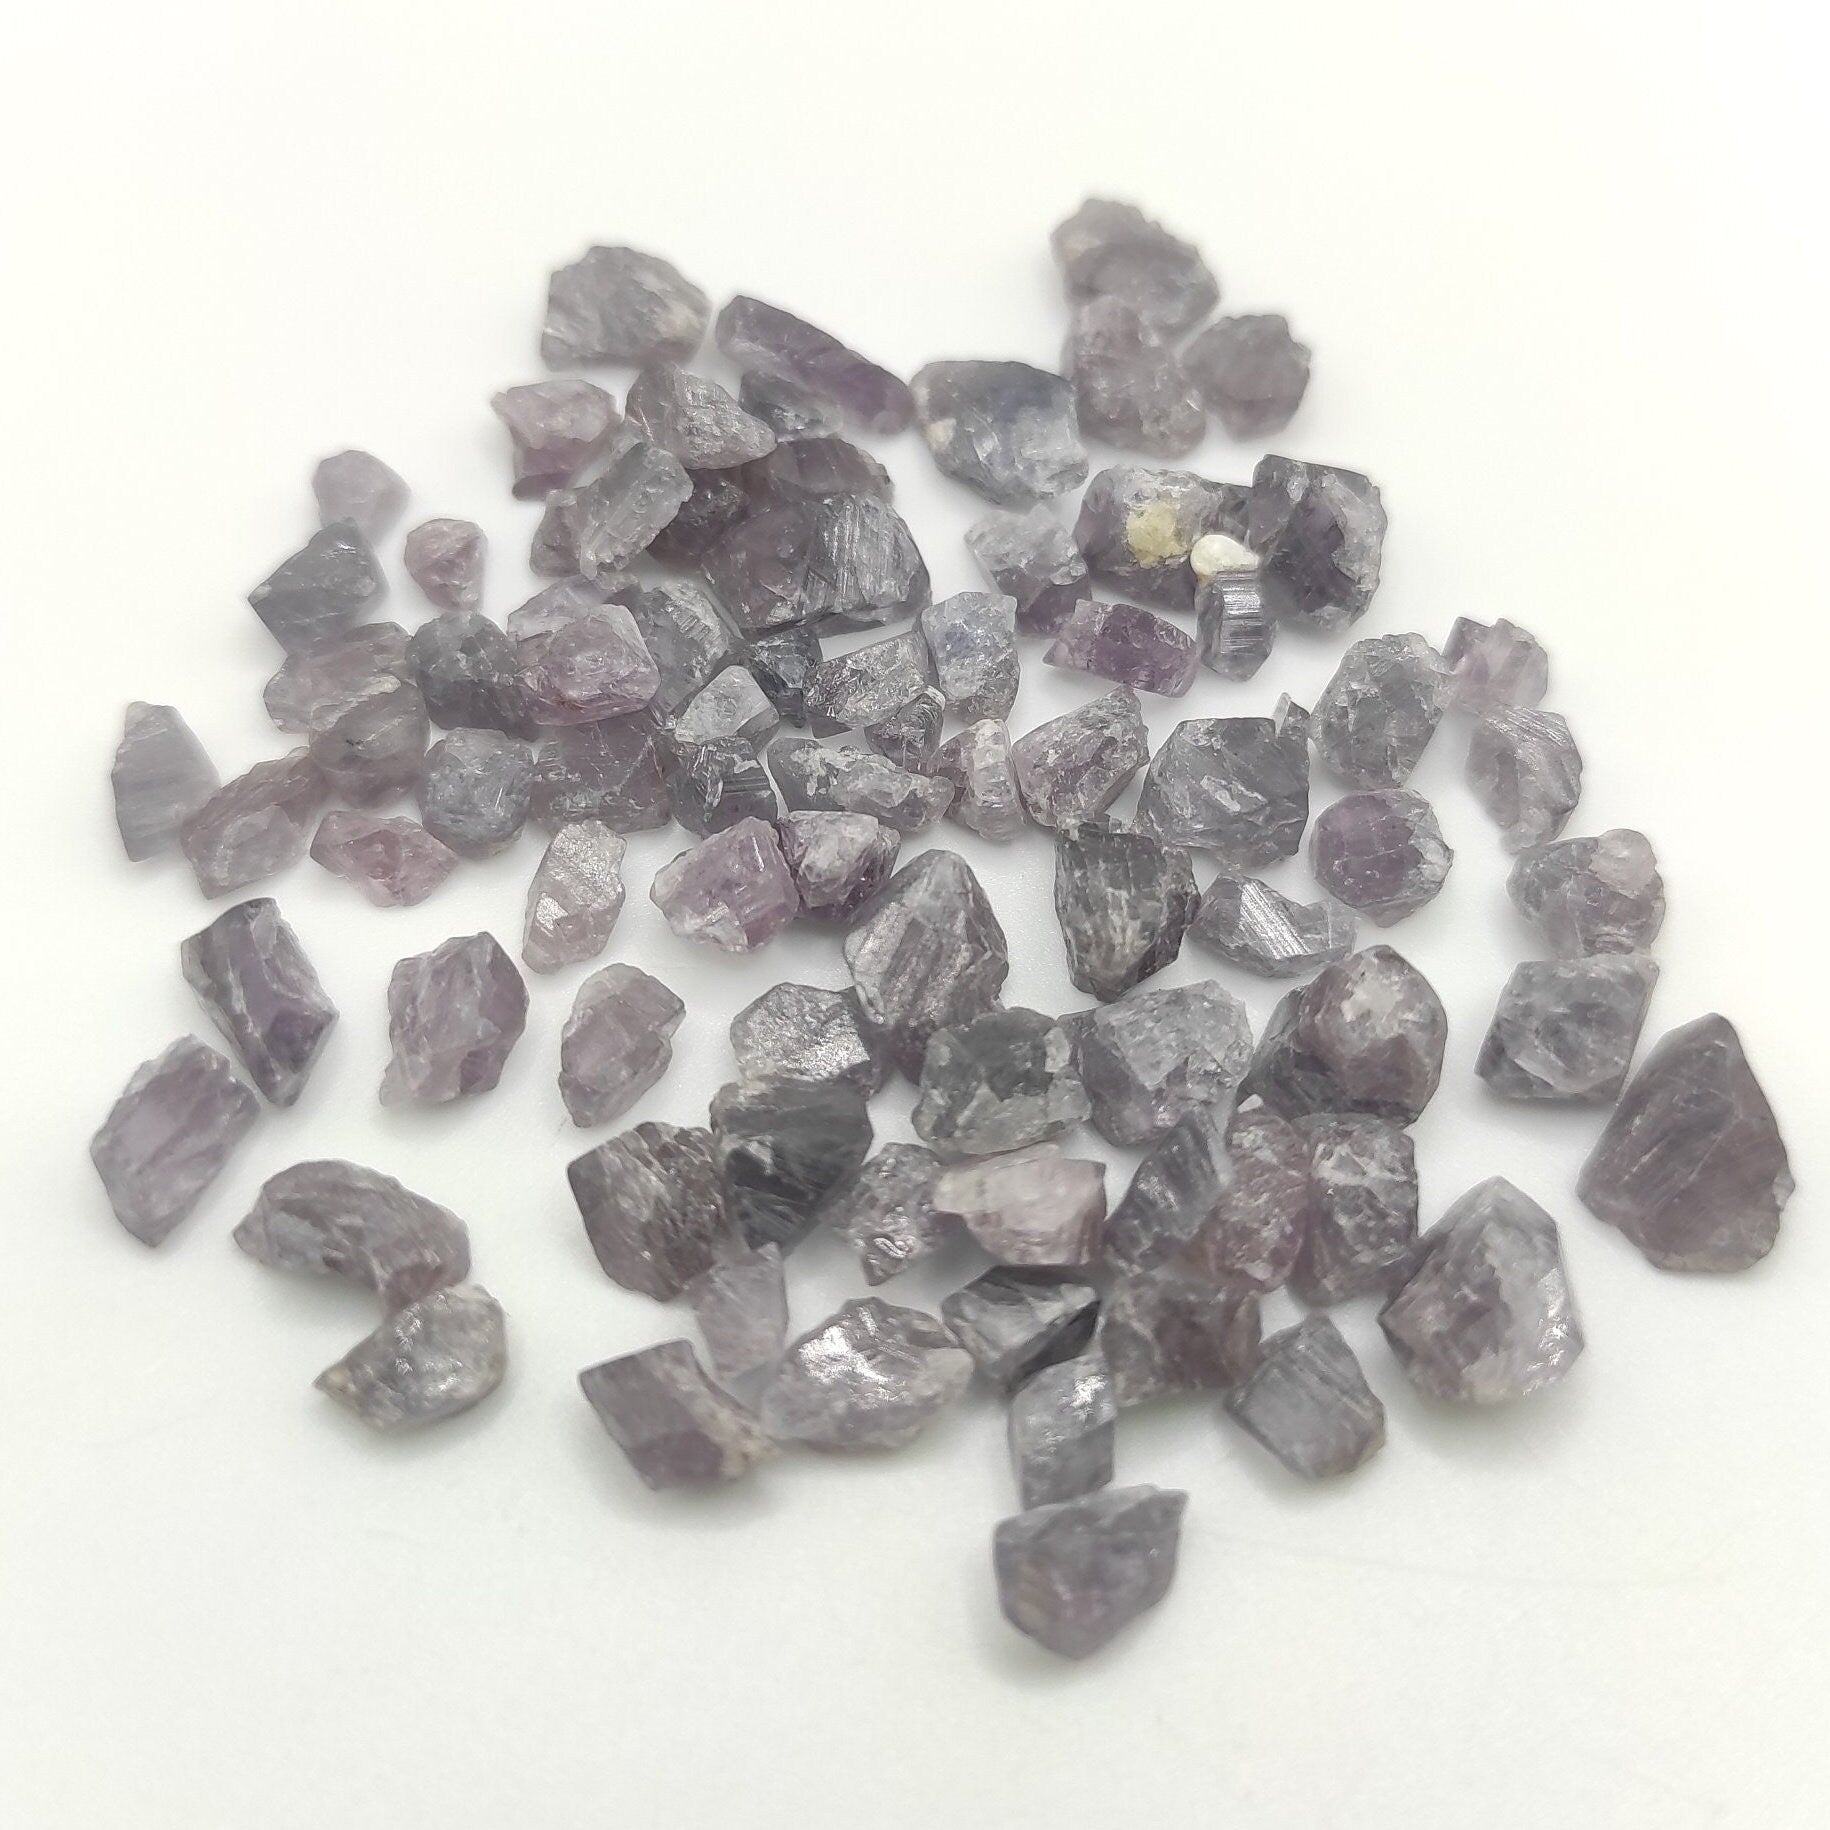 94ct Light Purple Spinel Lot Natural Spinel Untreated Gemstones Loose Spinel Rough Spinel Gems Raw Spinel Crystals Purple/Grey Spinel Lot